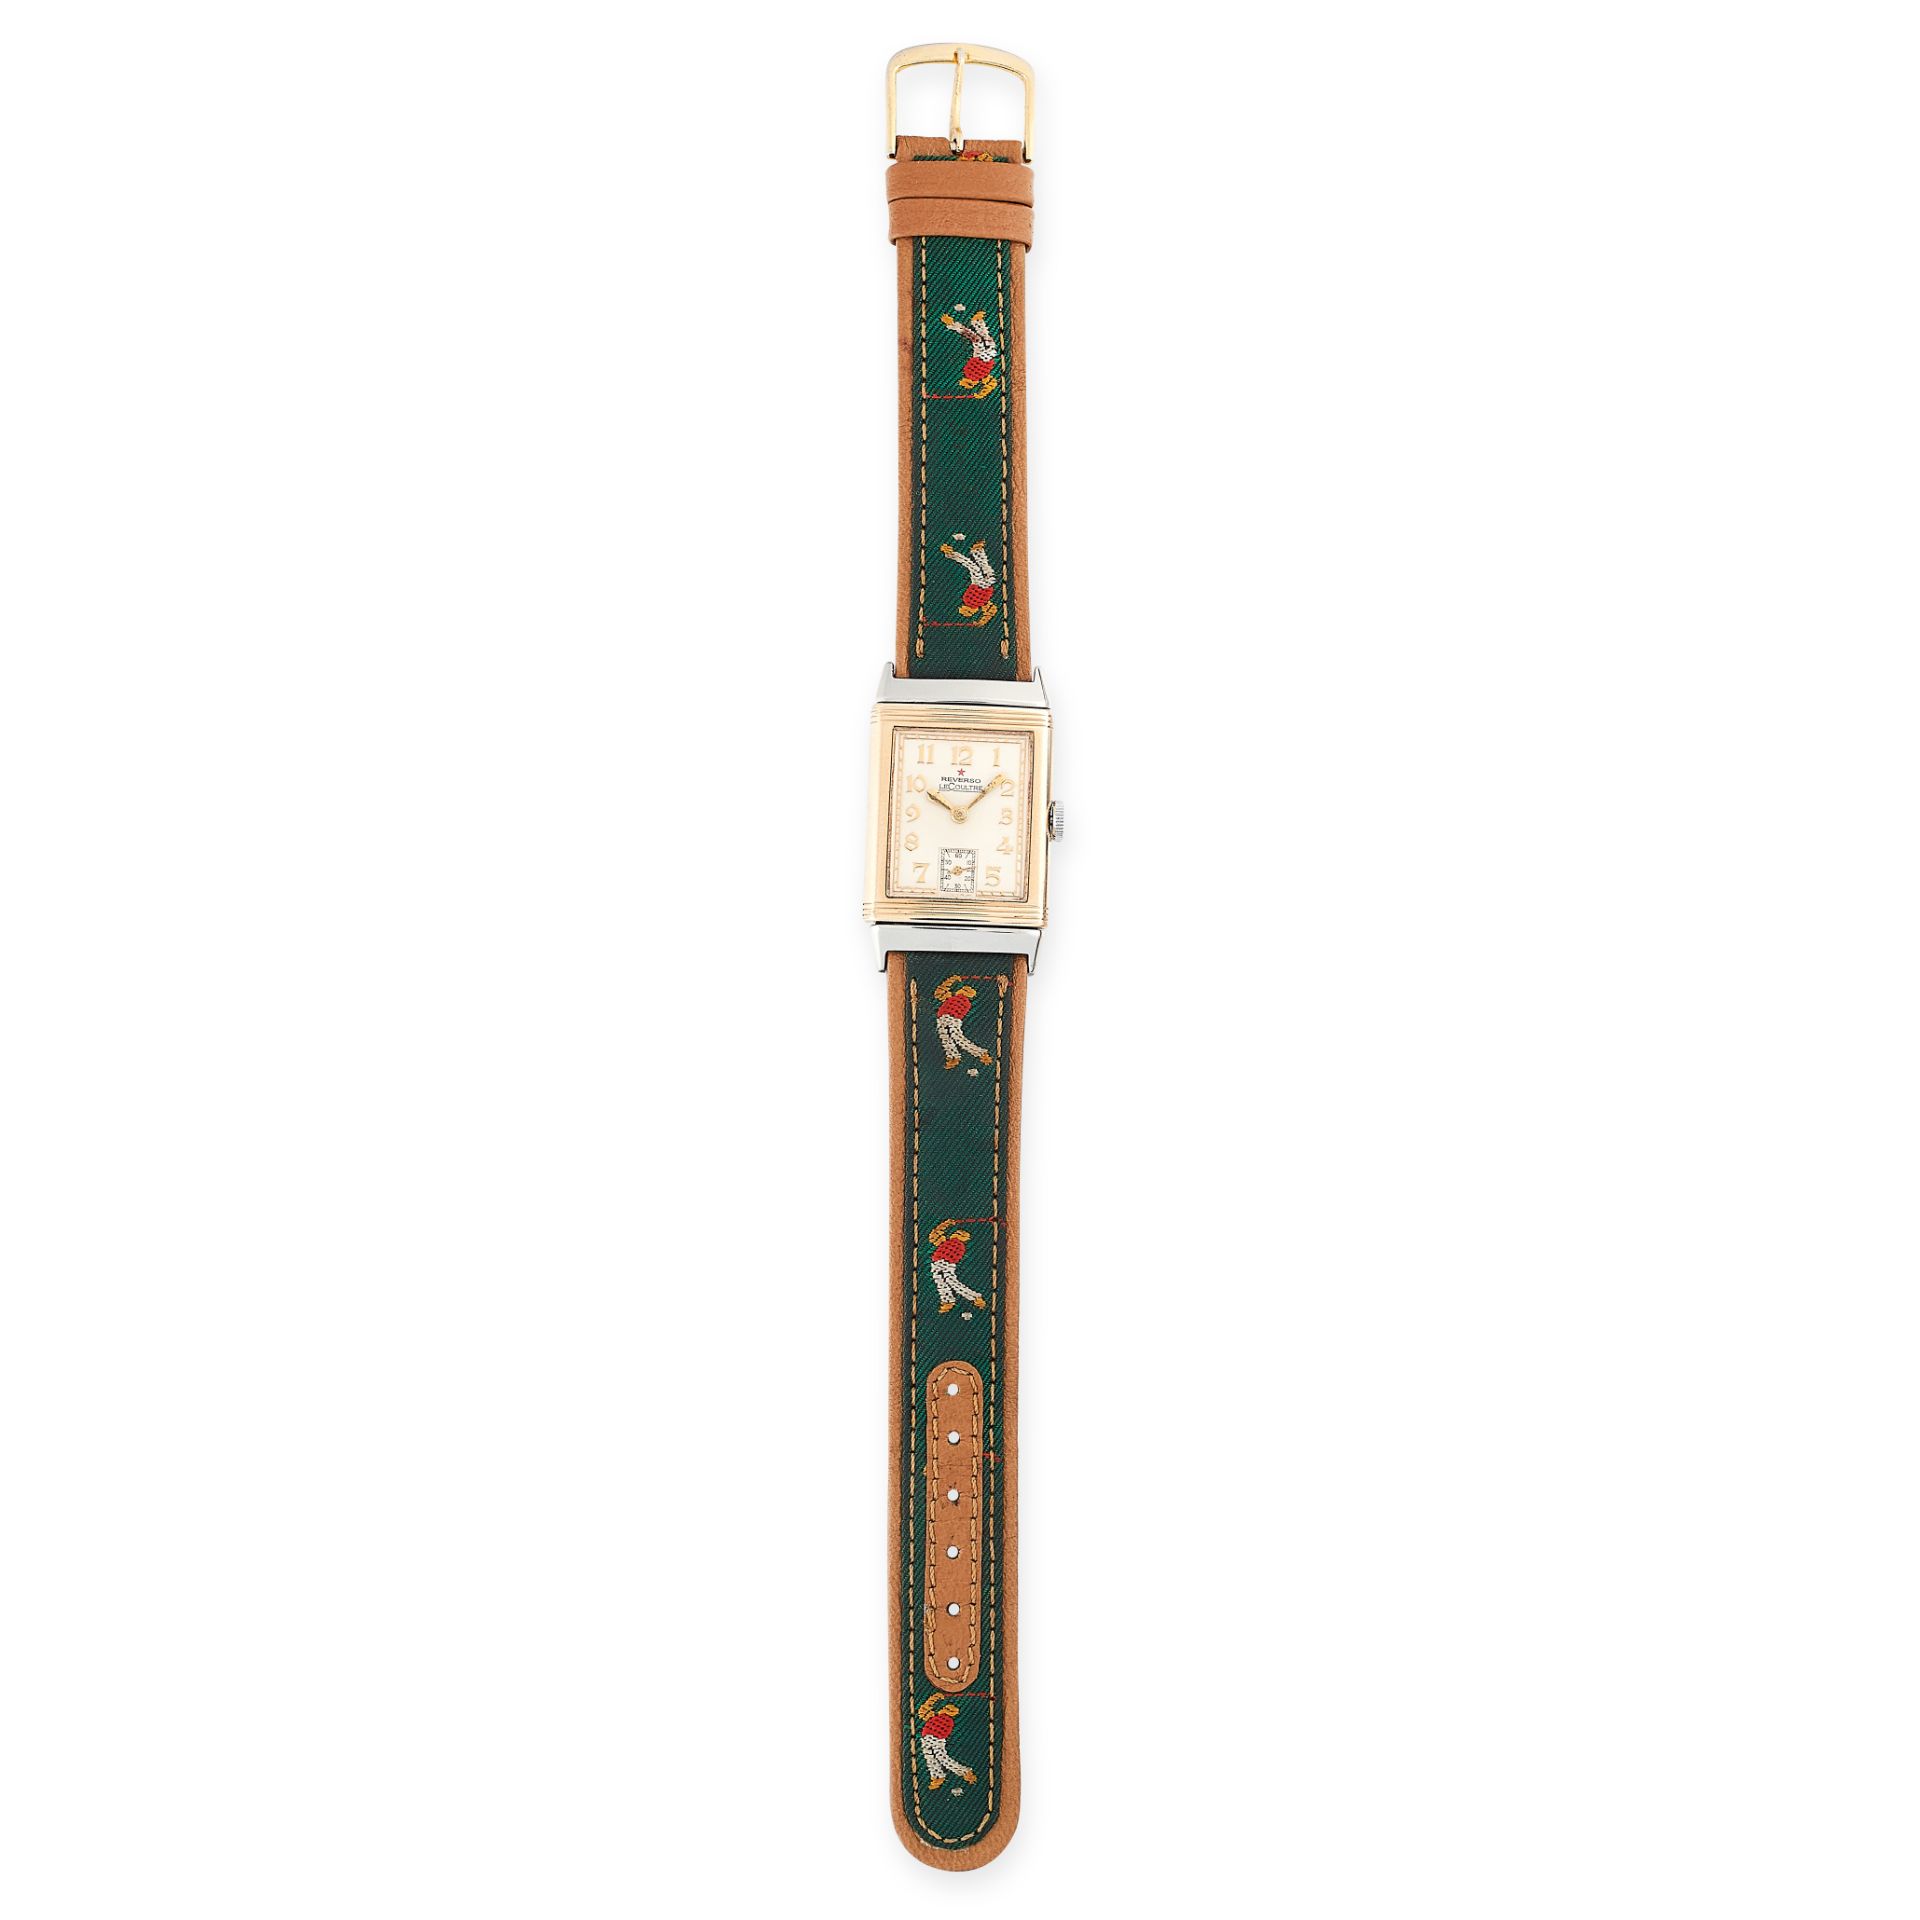 A JAEGER LE COULTRE REVERSO WRIST WATCH the rectangular reversible face is set with a white dial